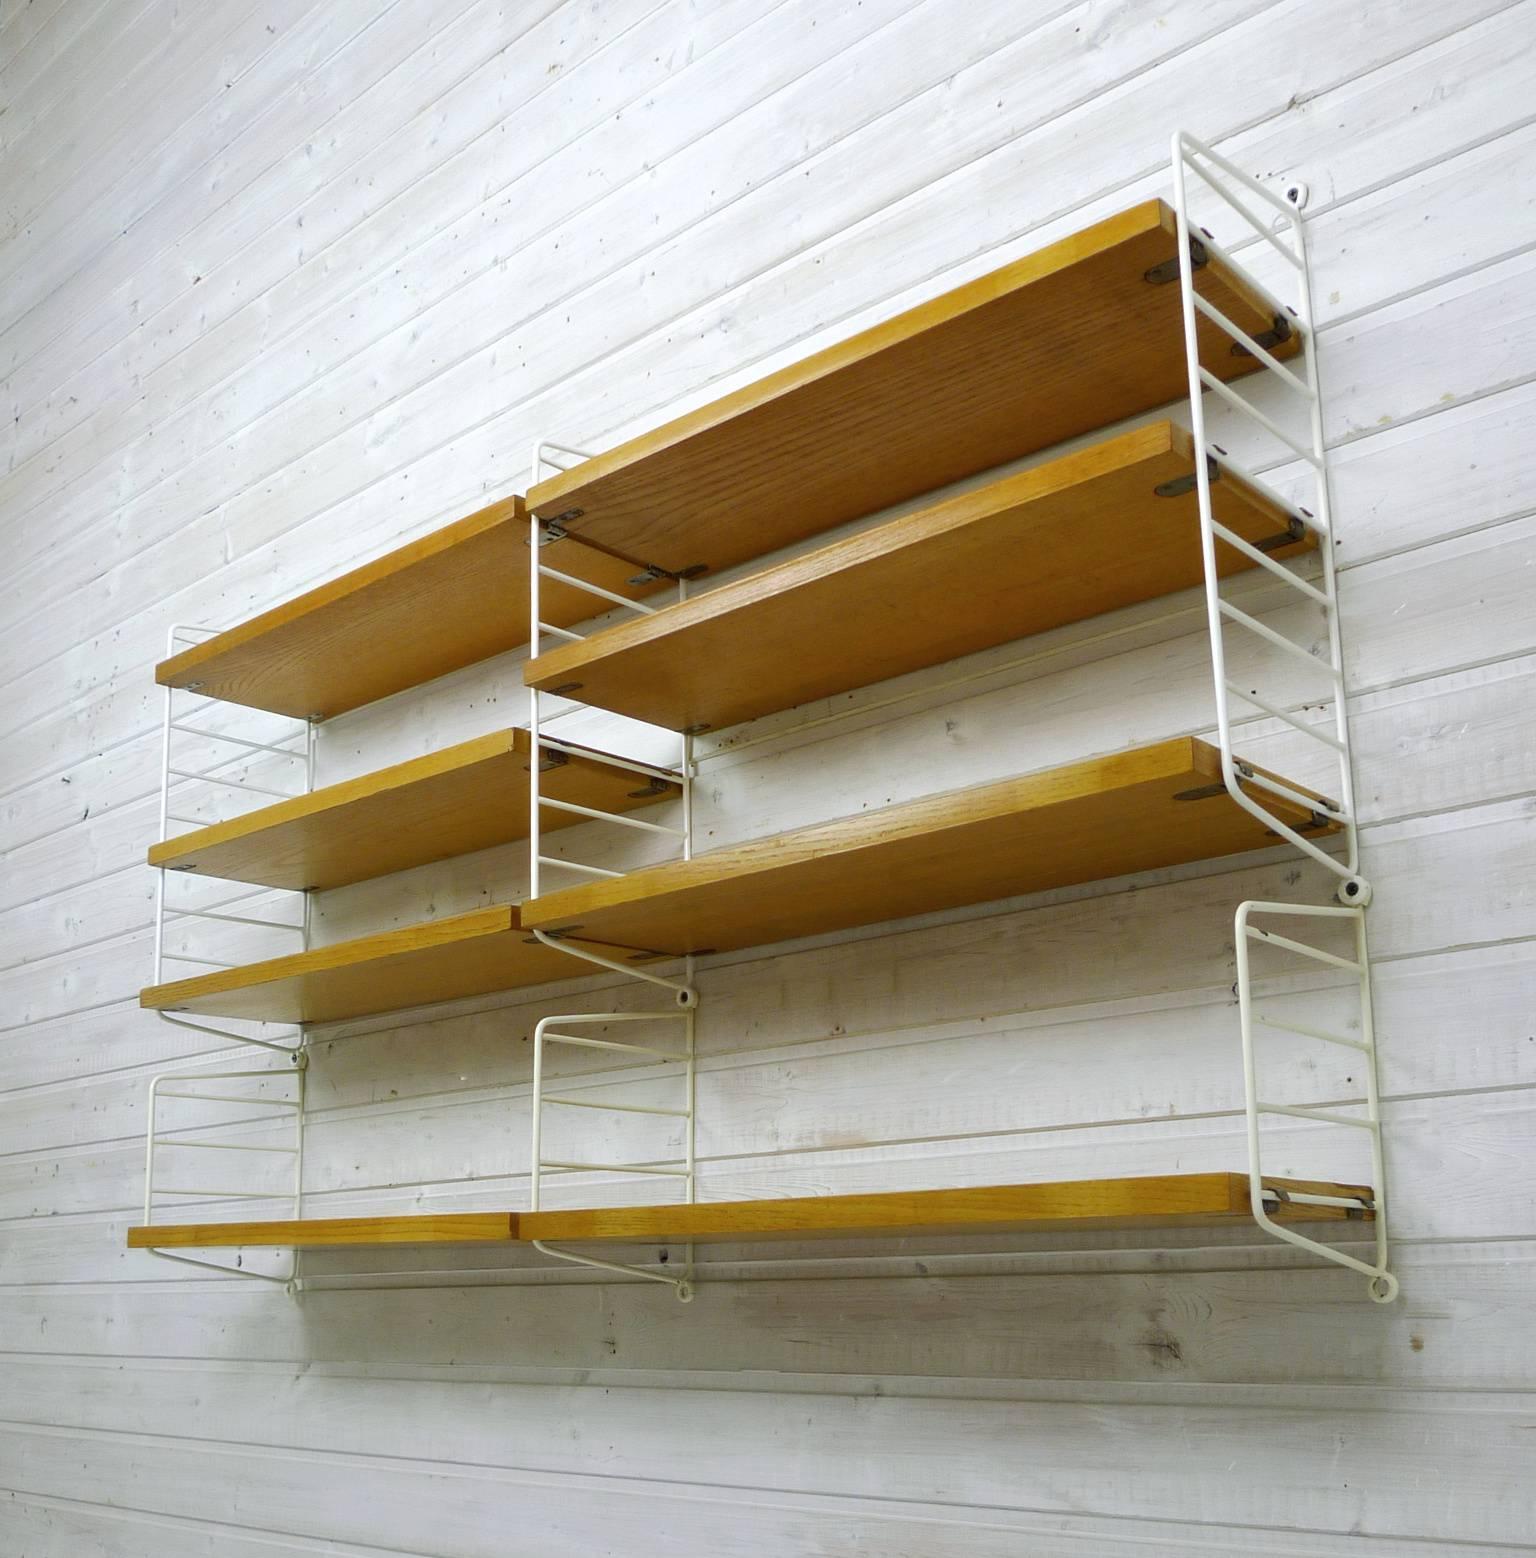 20th Century Ash Wall Shelving System by Nisse Strinning for String Design AB, Sweden, 1960s